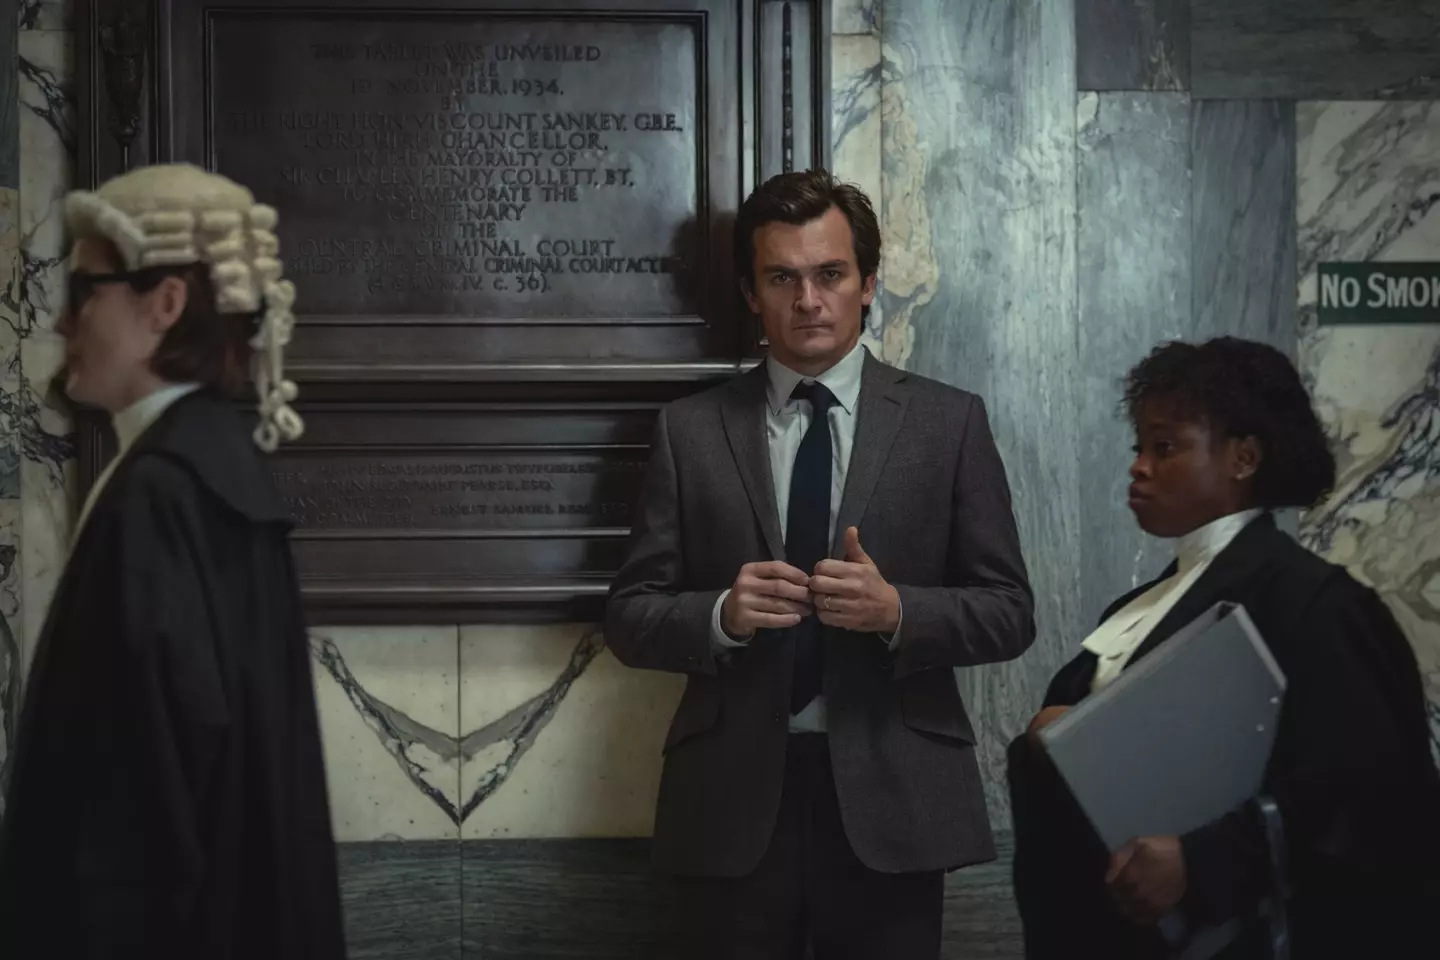 The six-parter stars Rupert Friend as James Whitehouse, a Conservative MP whose affair with a researcher is making headlines.